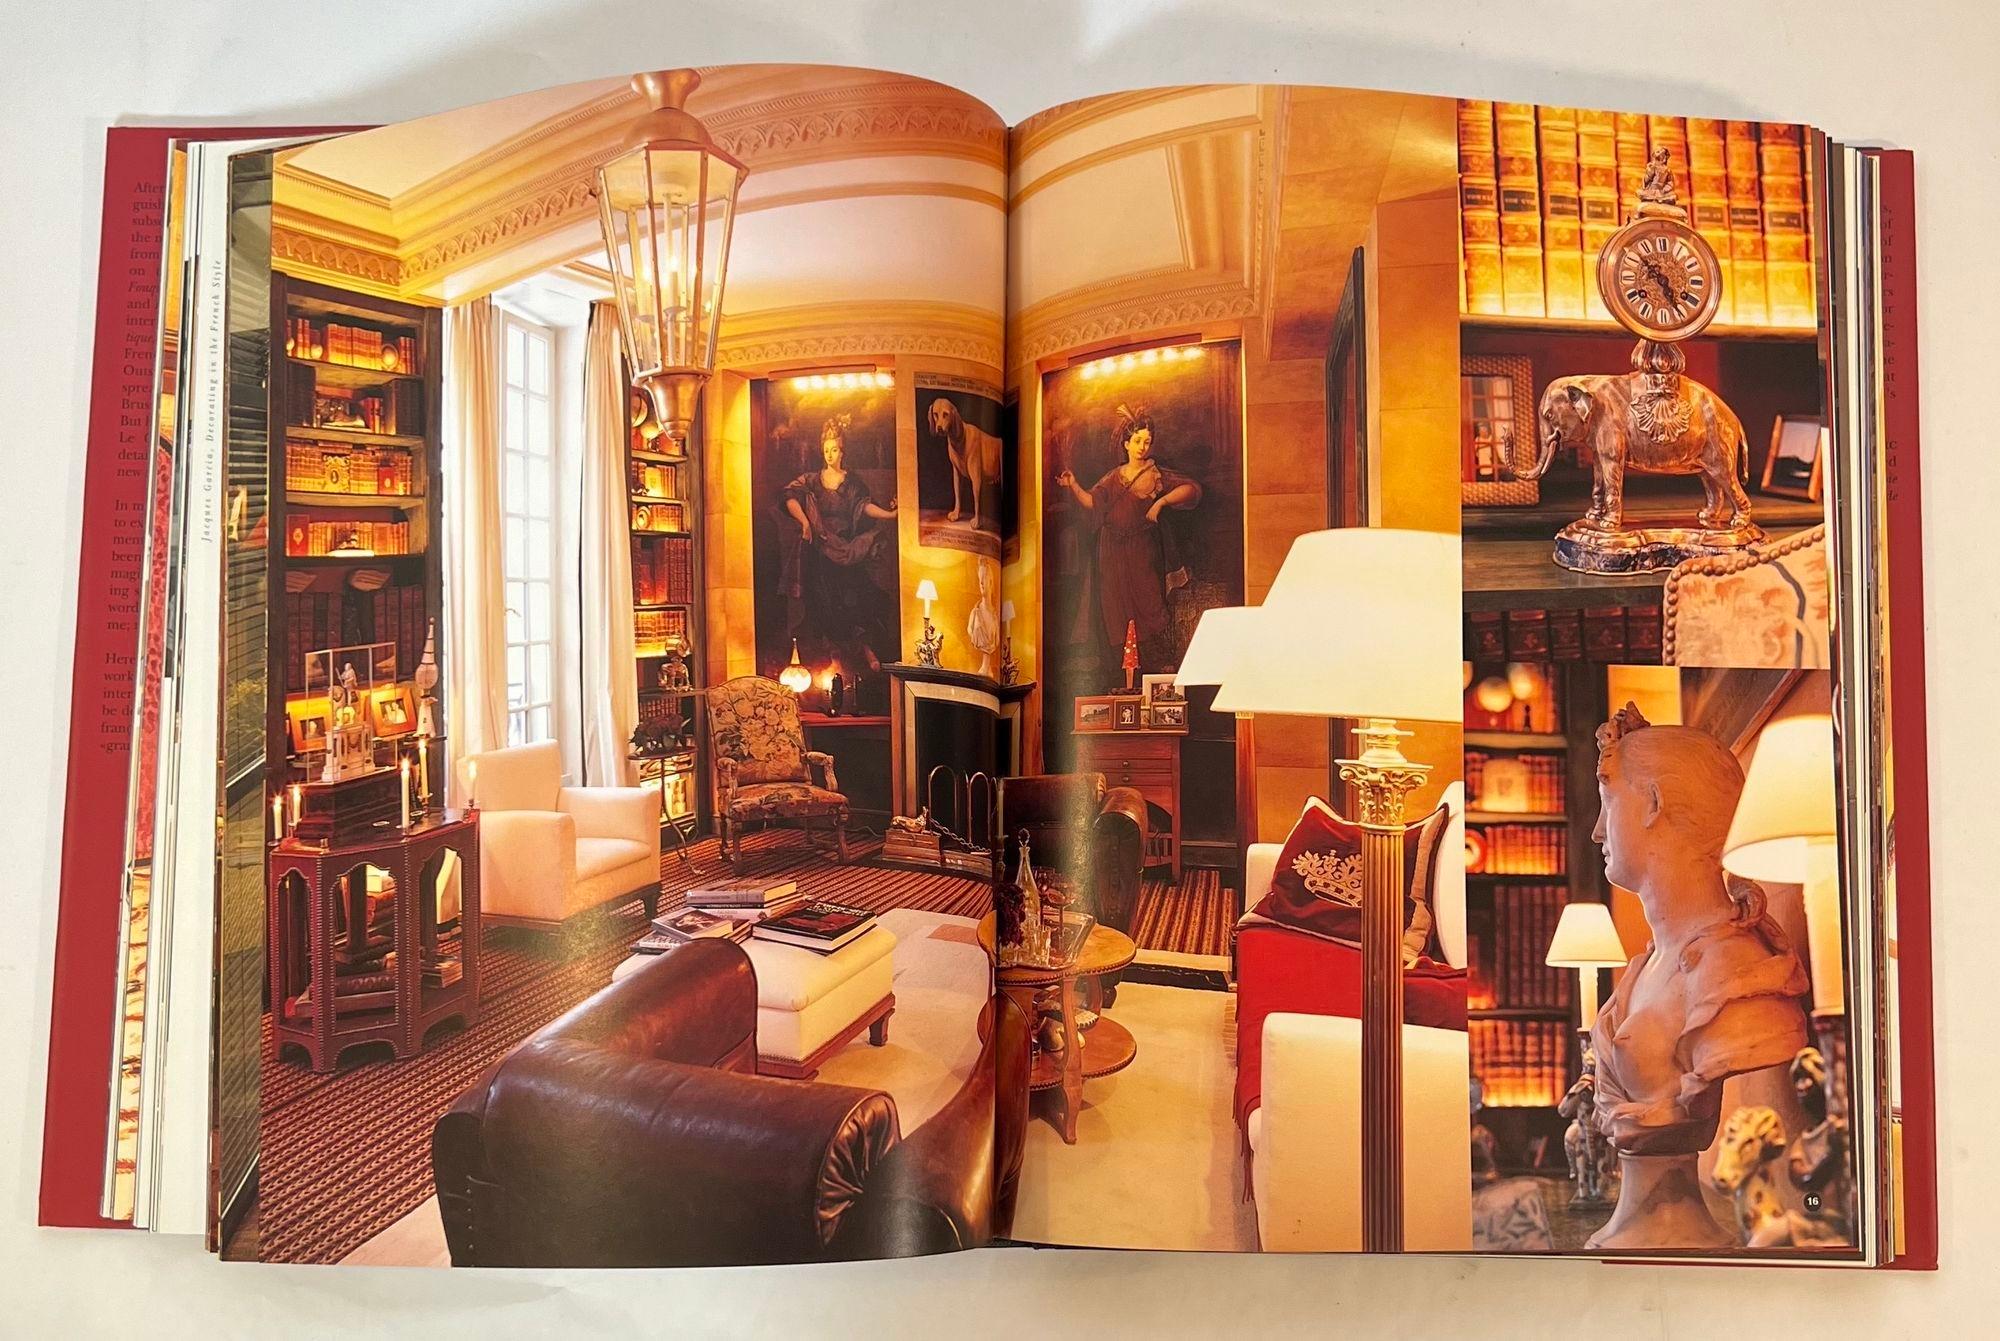 Jacques Garcia Decorating In The French Style Book by Franck Ferrand 1999 In Good Condition For Sale In North Hollywood, CA